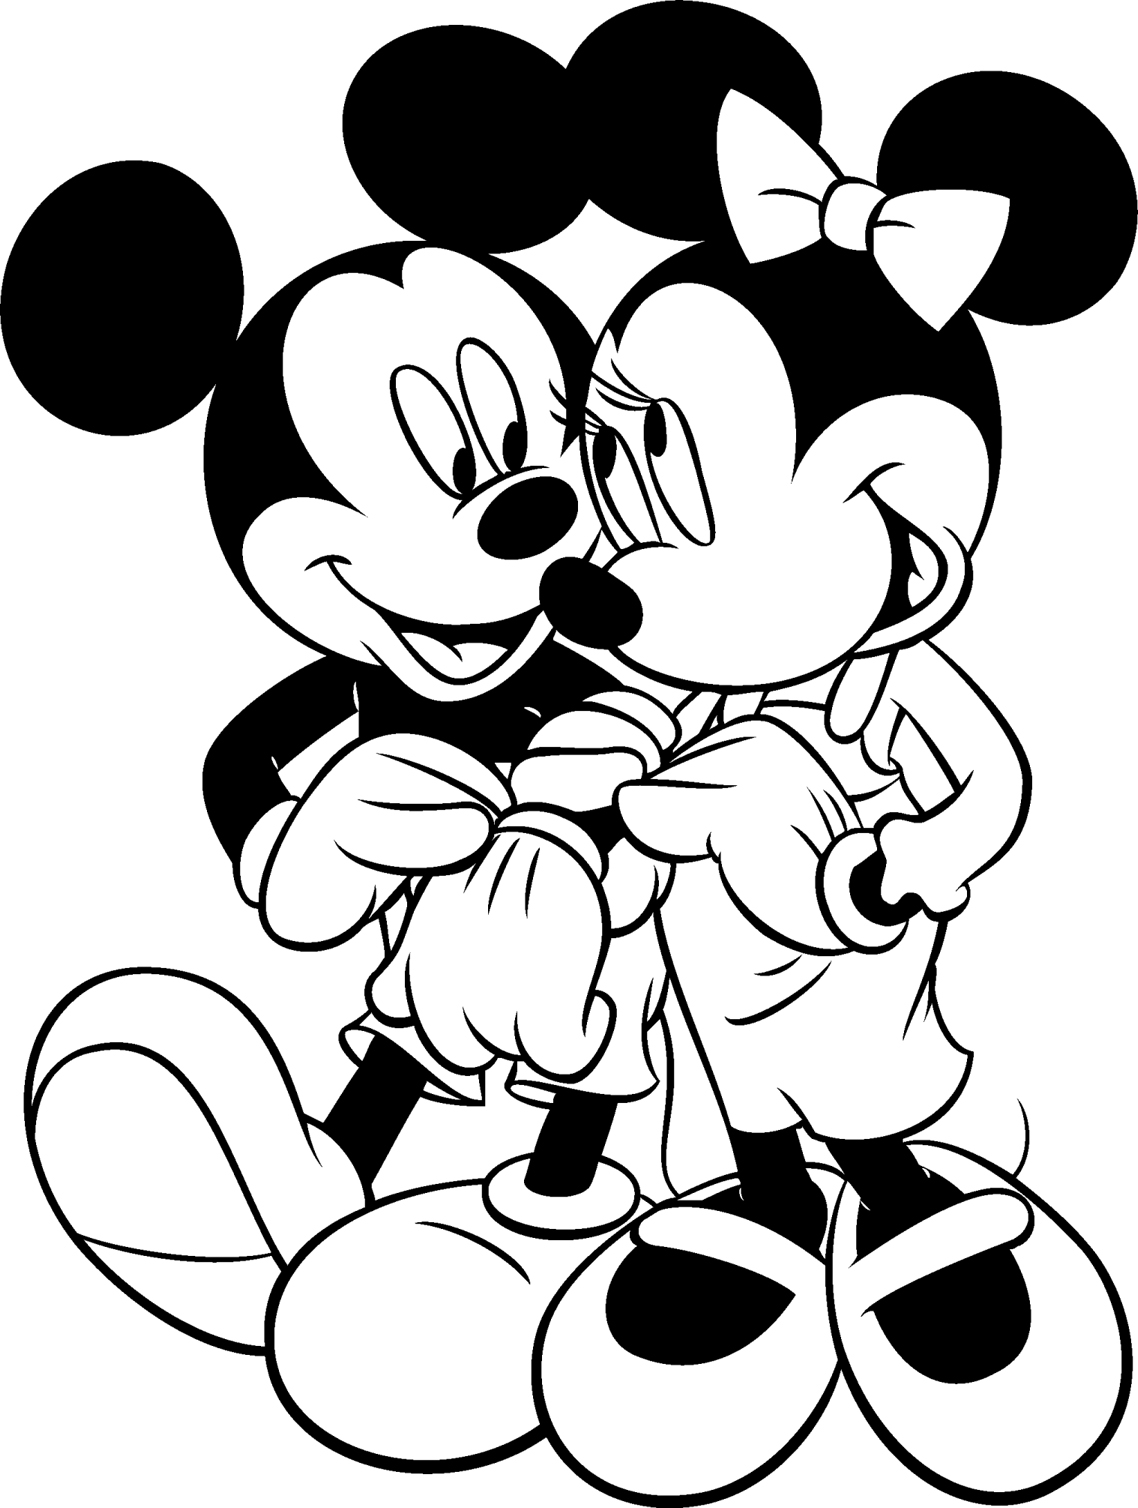 Disney Coloring Pages (17) - Coloring Kids